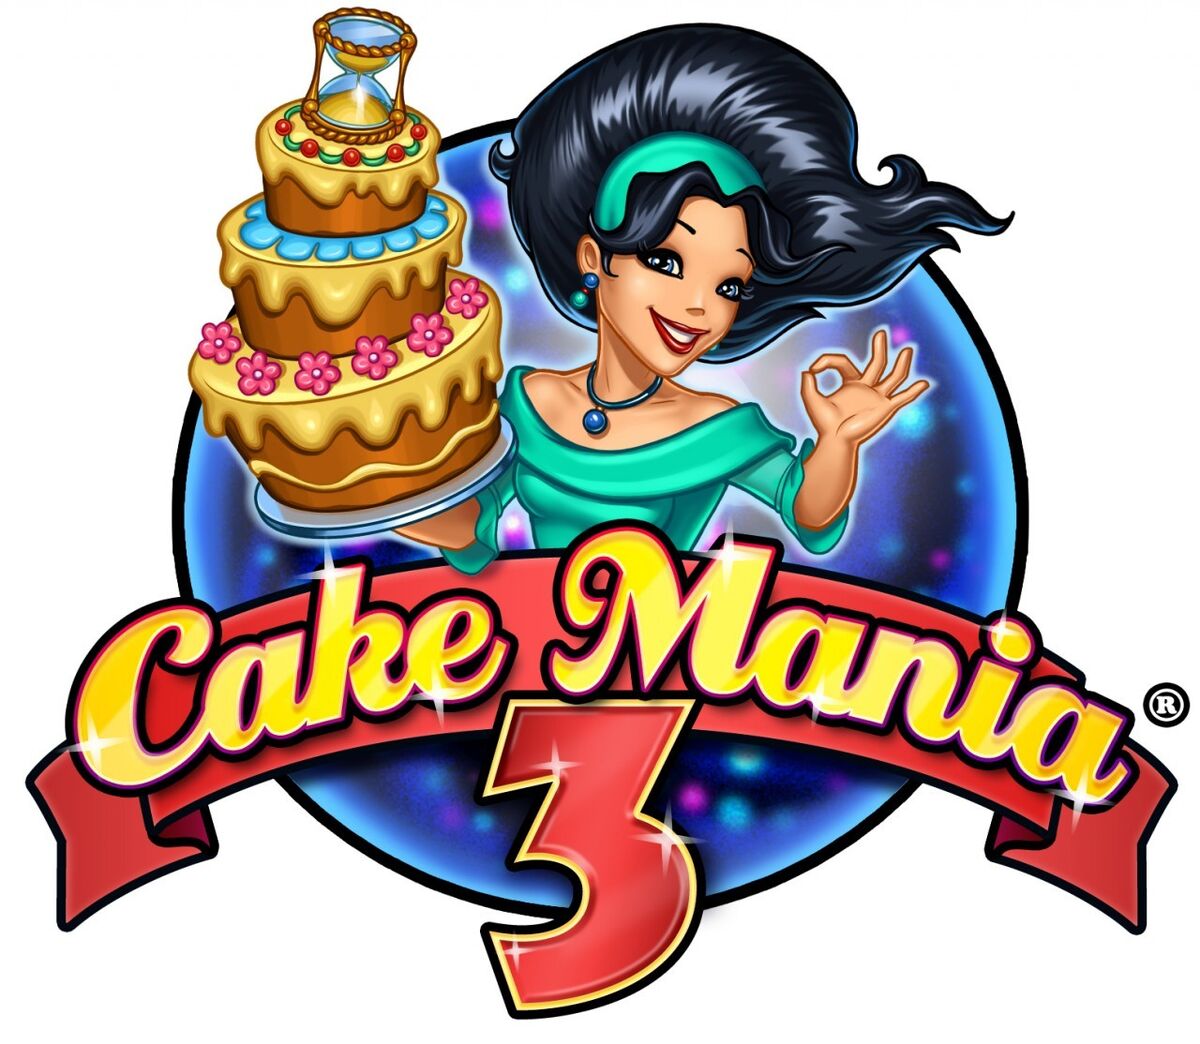 Transition to DS a bit bumpy for 'Cake Mania'